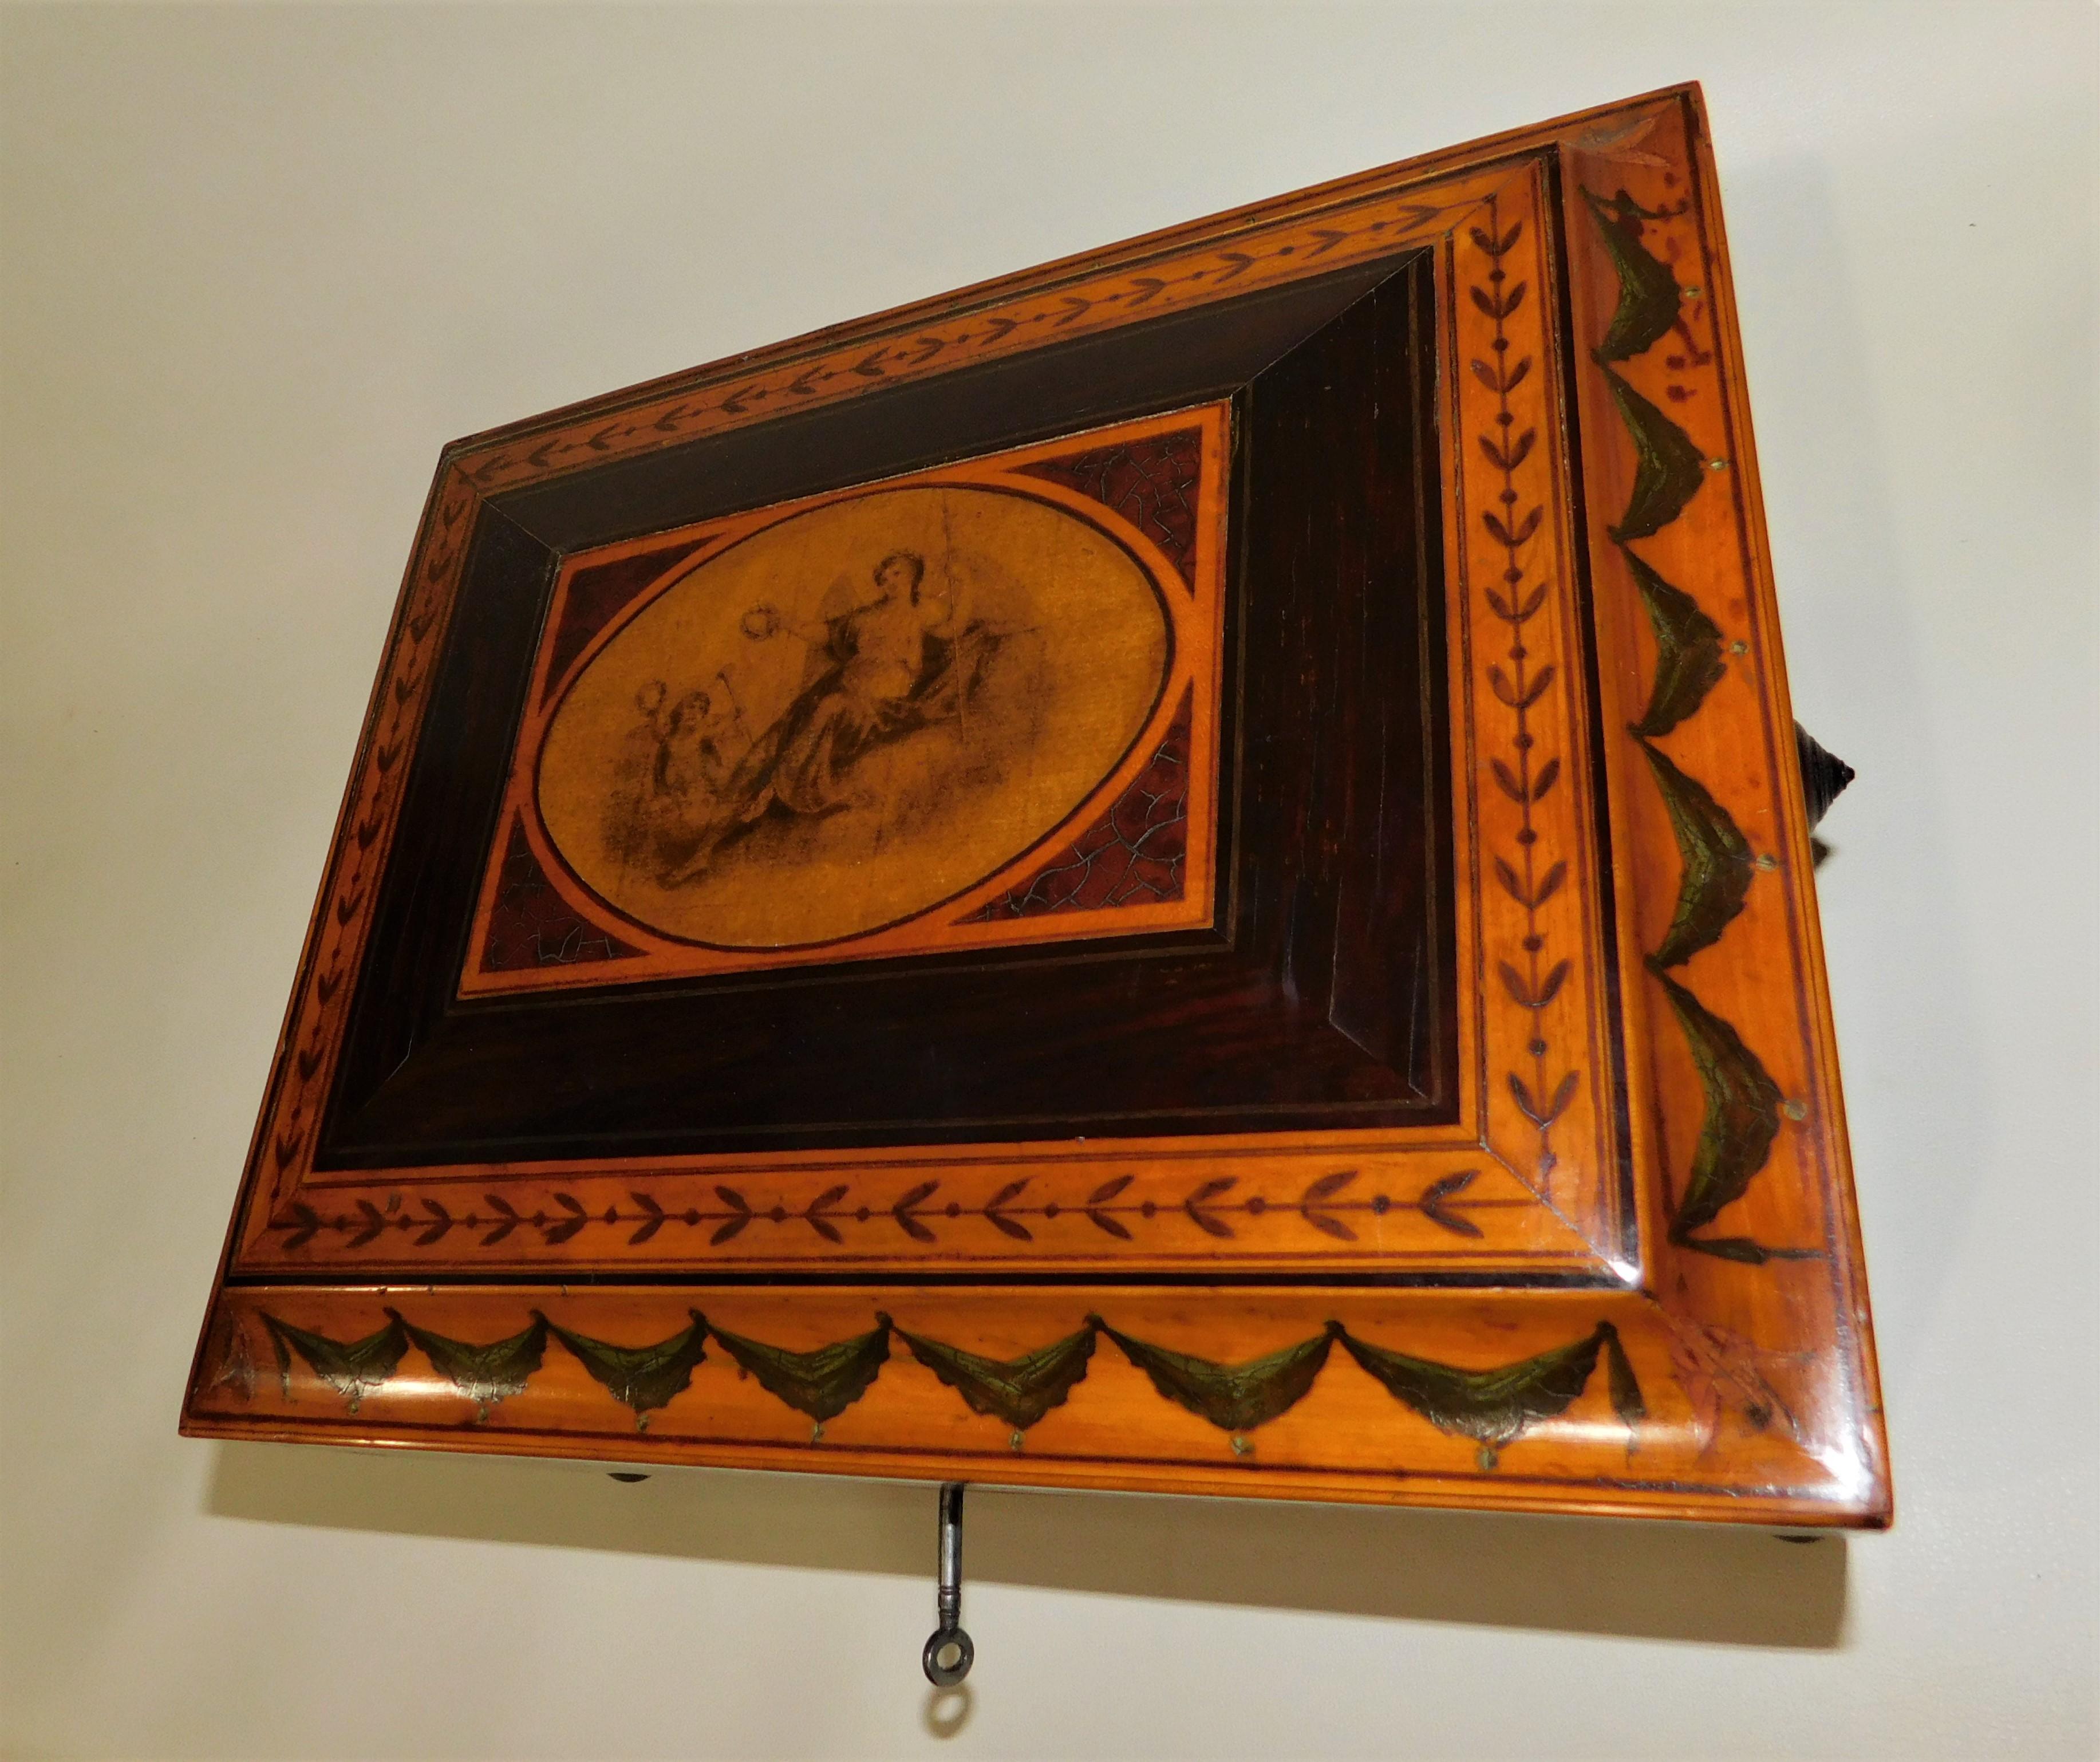 Refitted Georgian satinwood four footed sewing wood box with working lock and key, circa 1825.